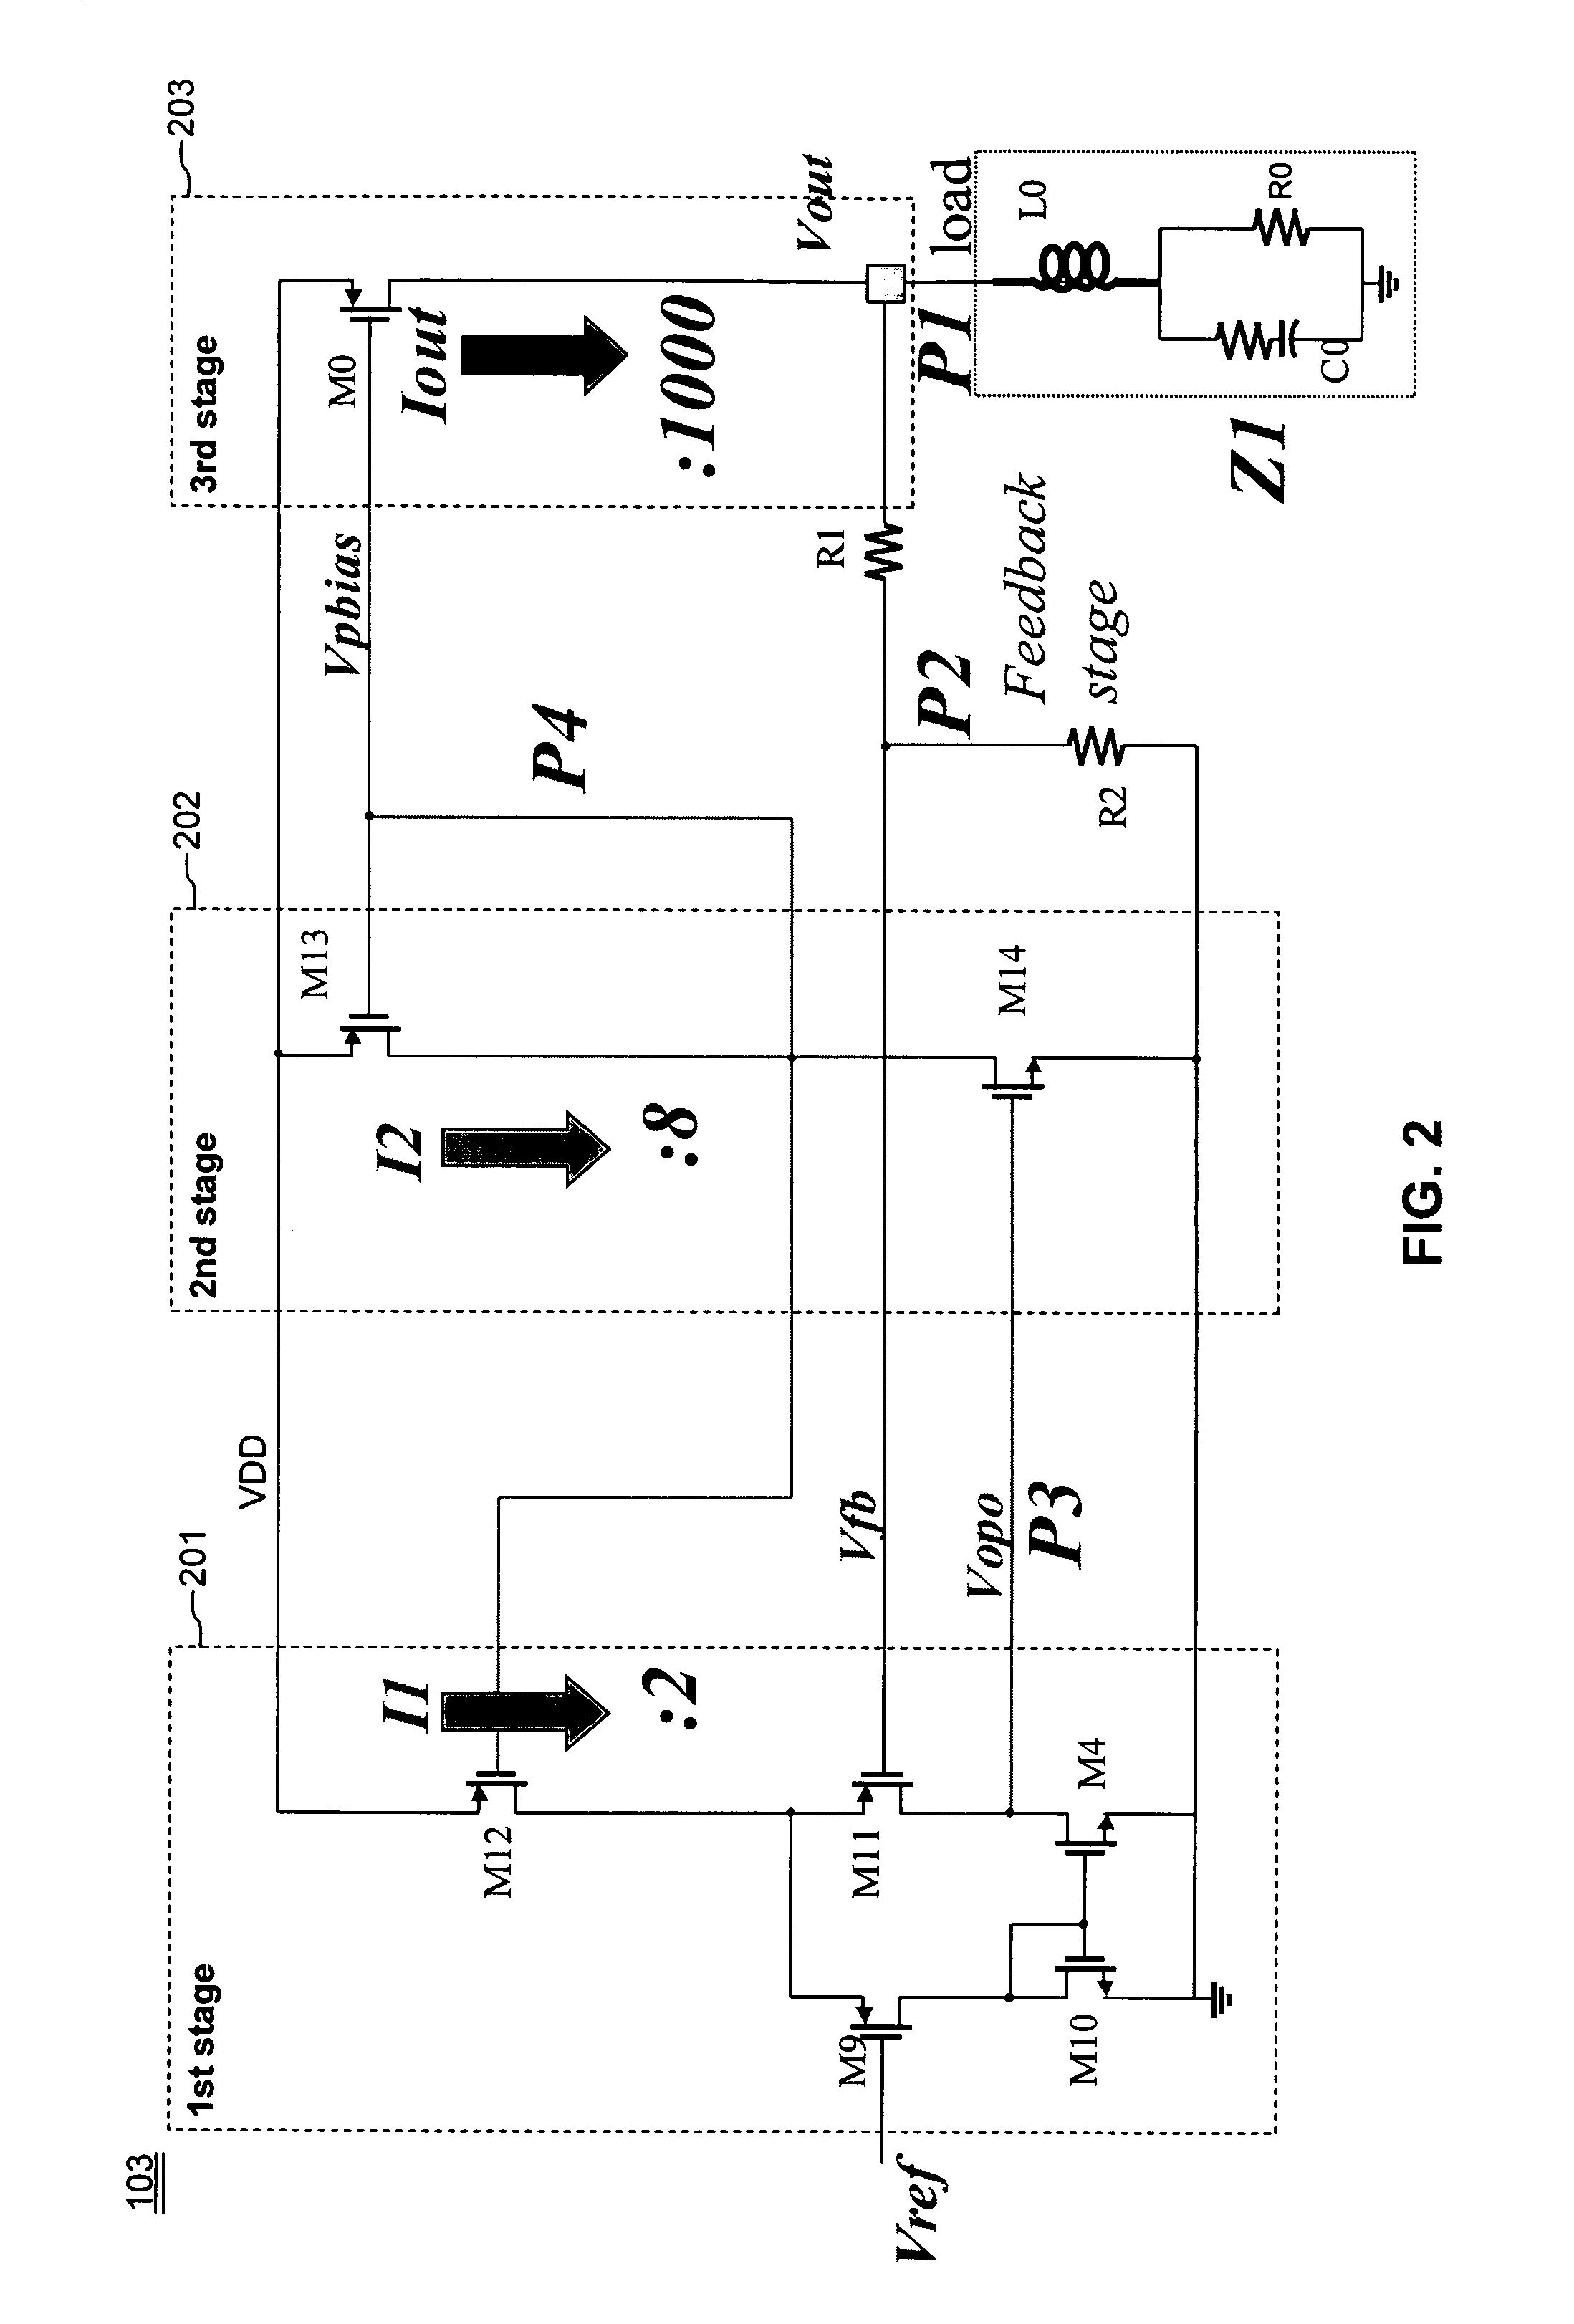 Power management unit for use in portable applications